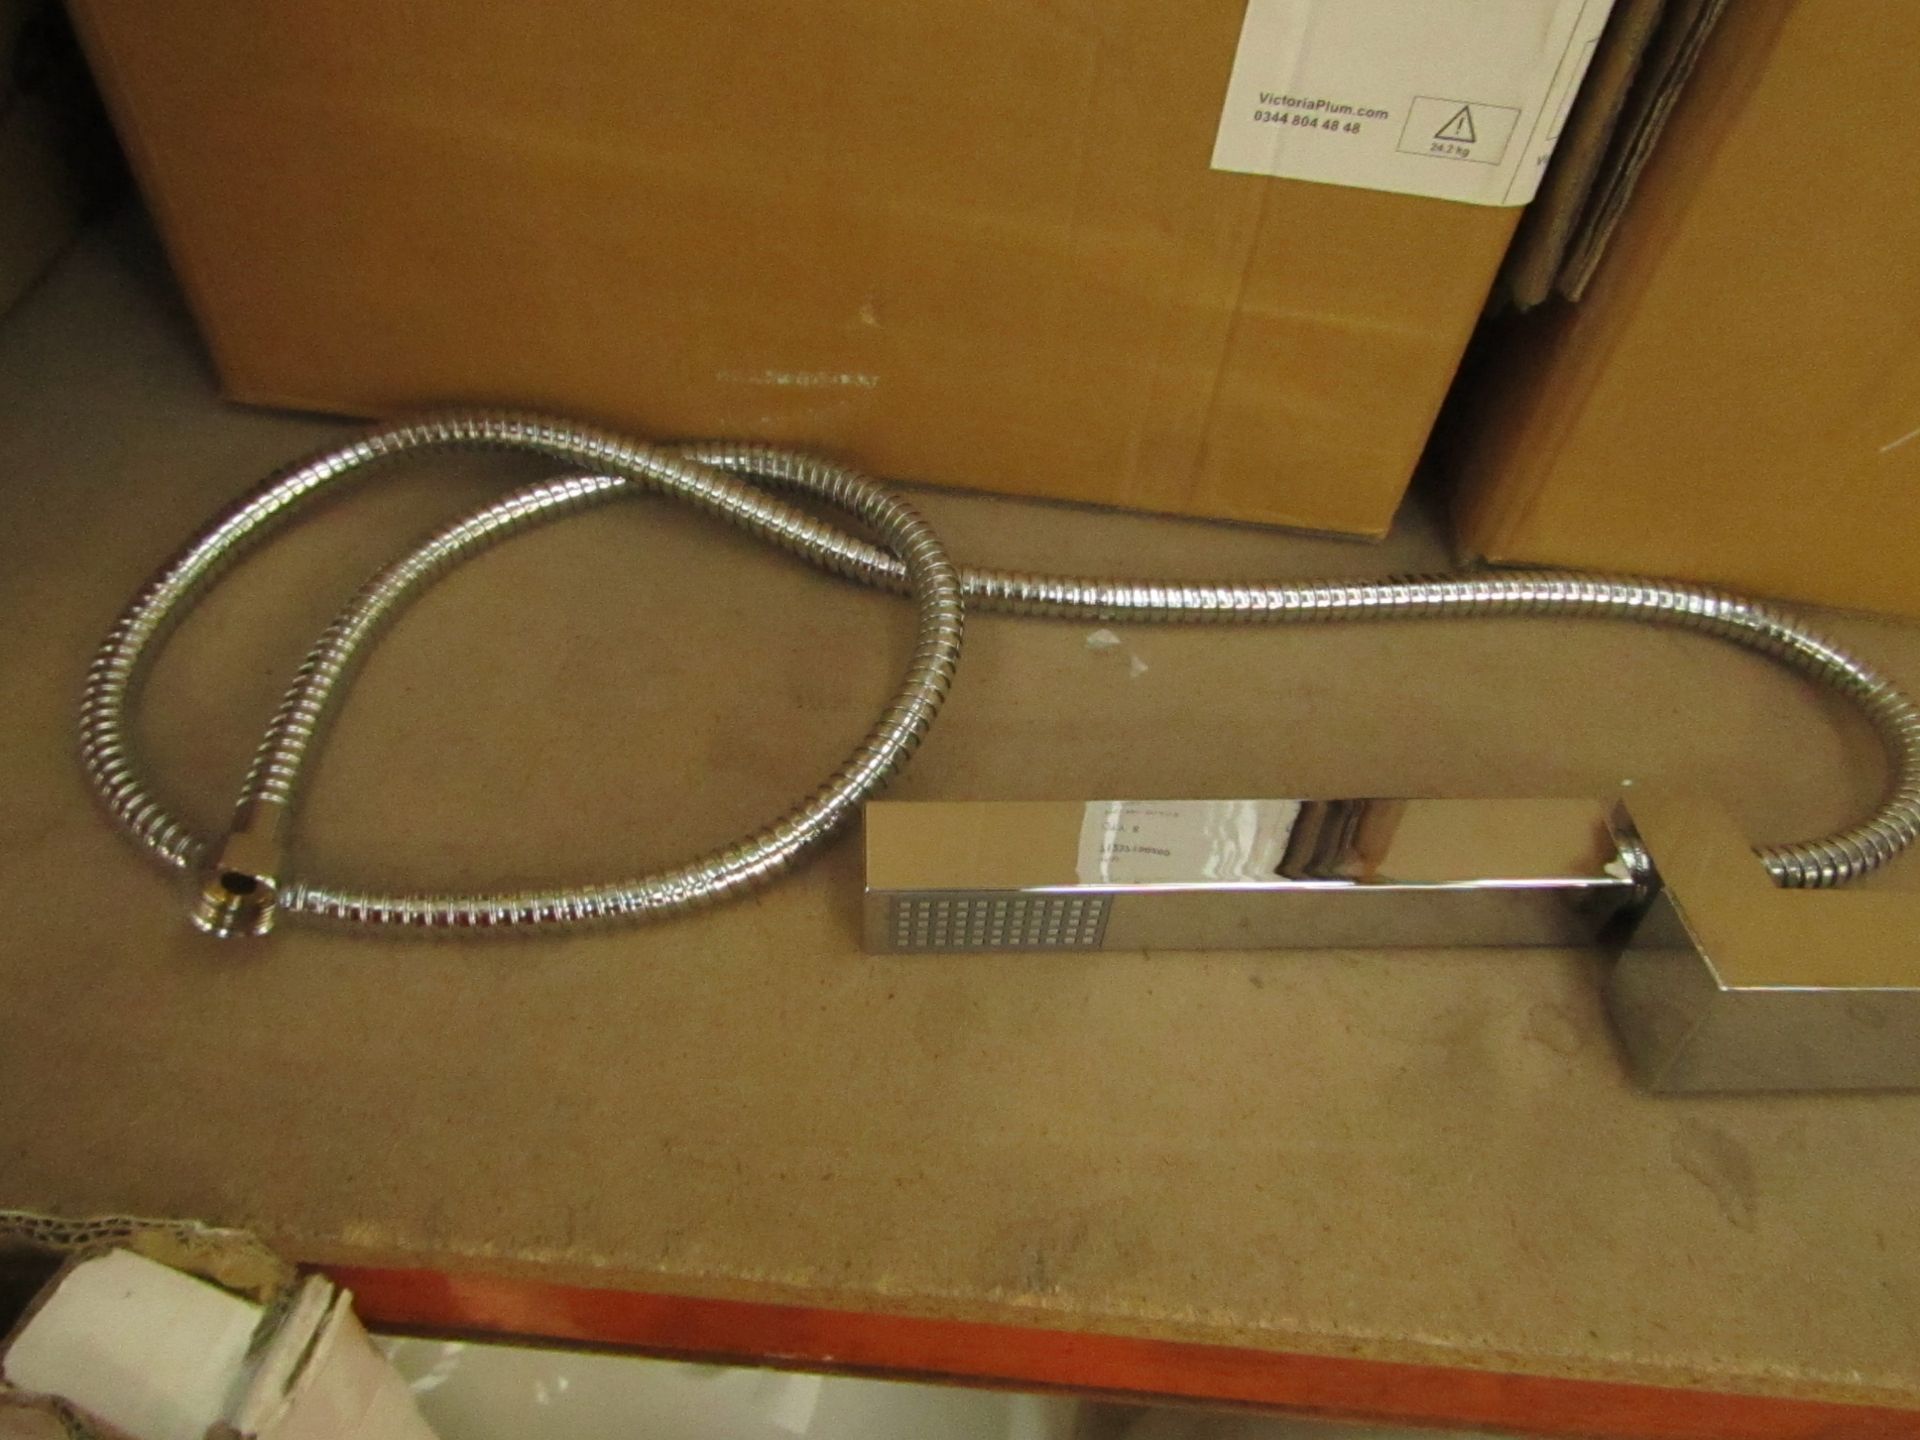 Square hand shower head with wall bracket & shower hose. All new in packaging.